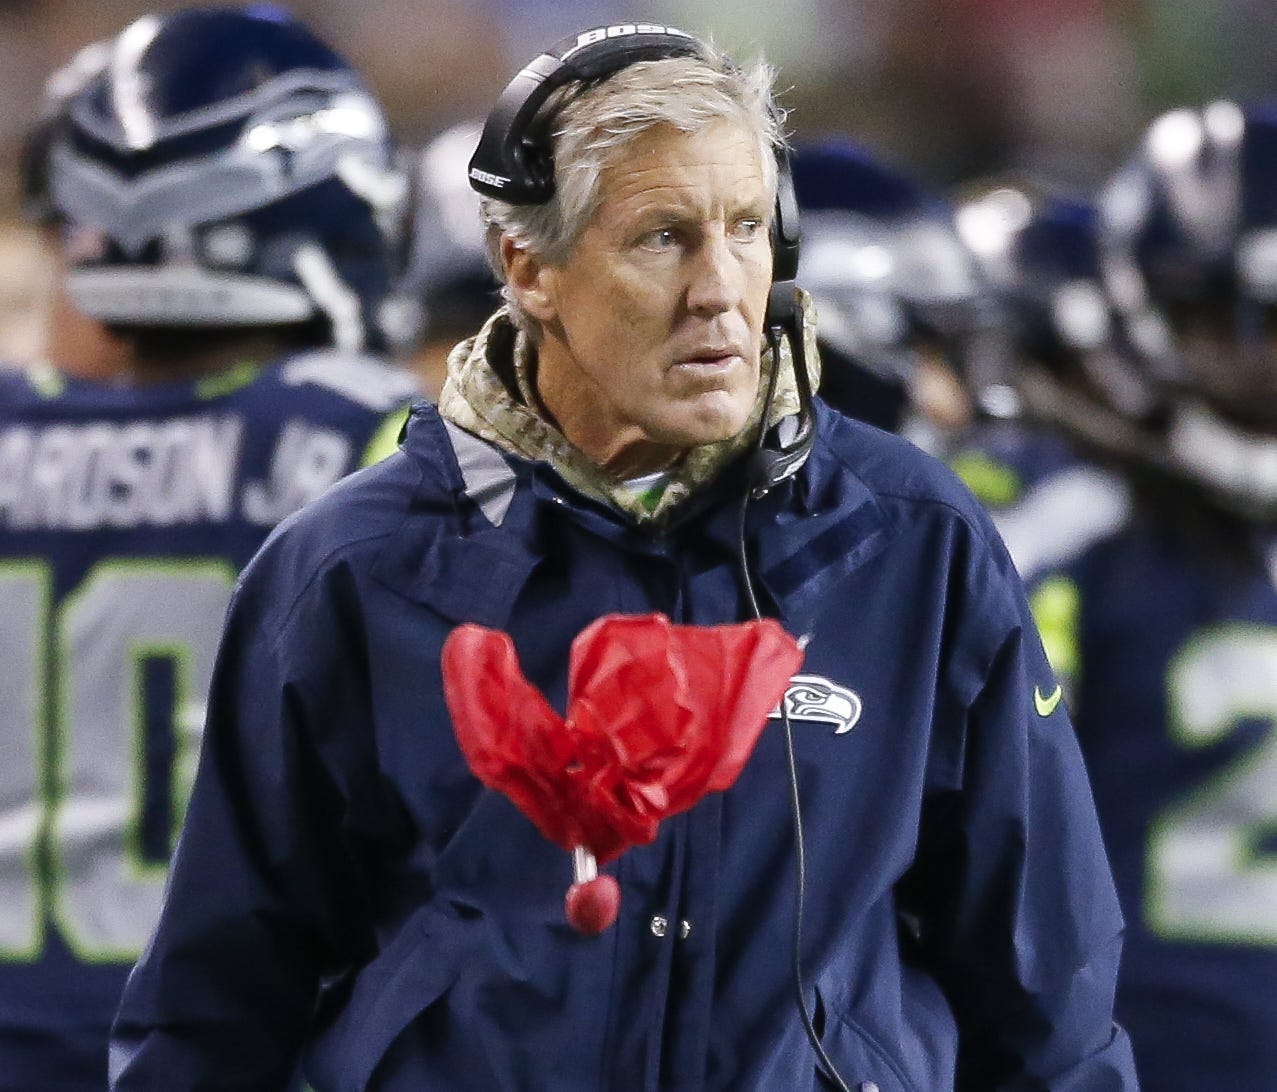 Pete Carroll's Seahawks are currently outside the NFC playoff field.